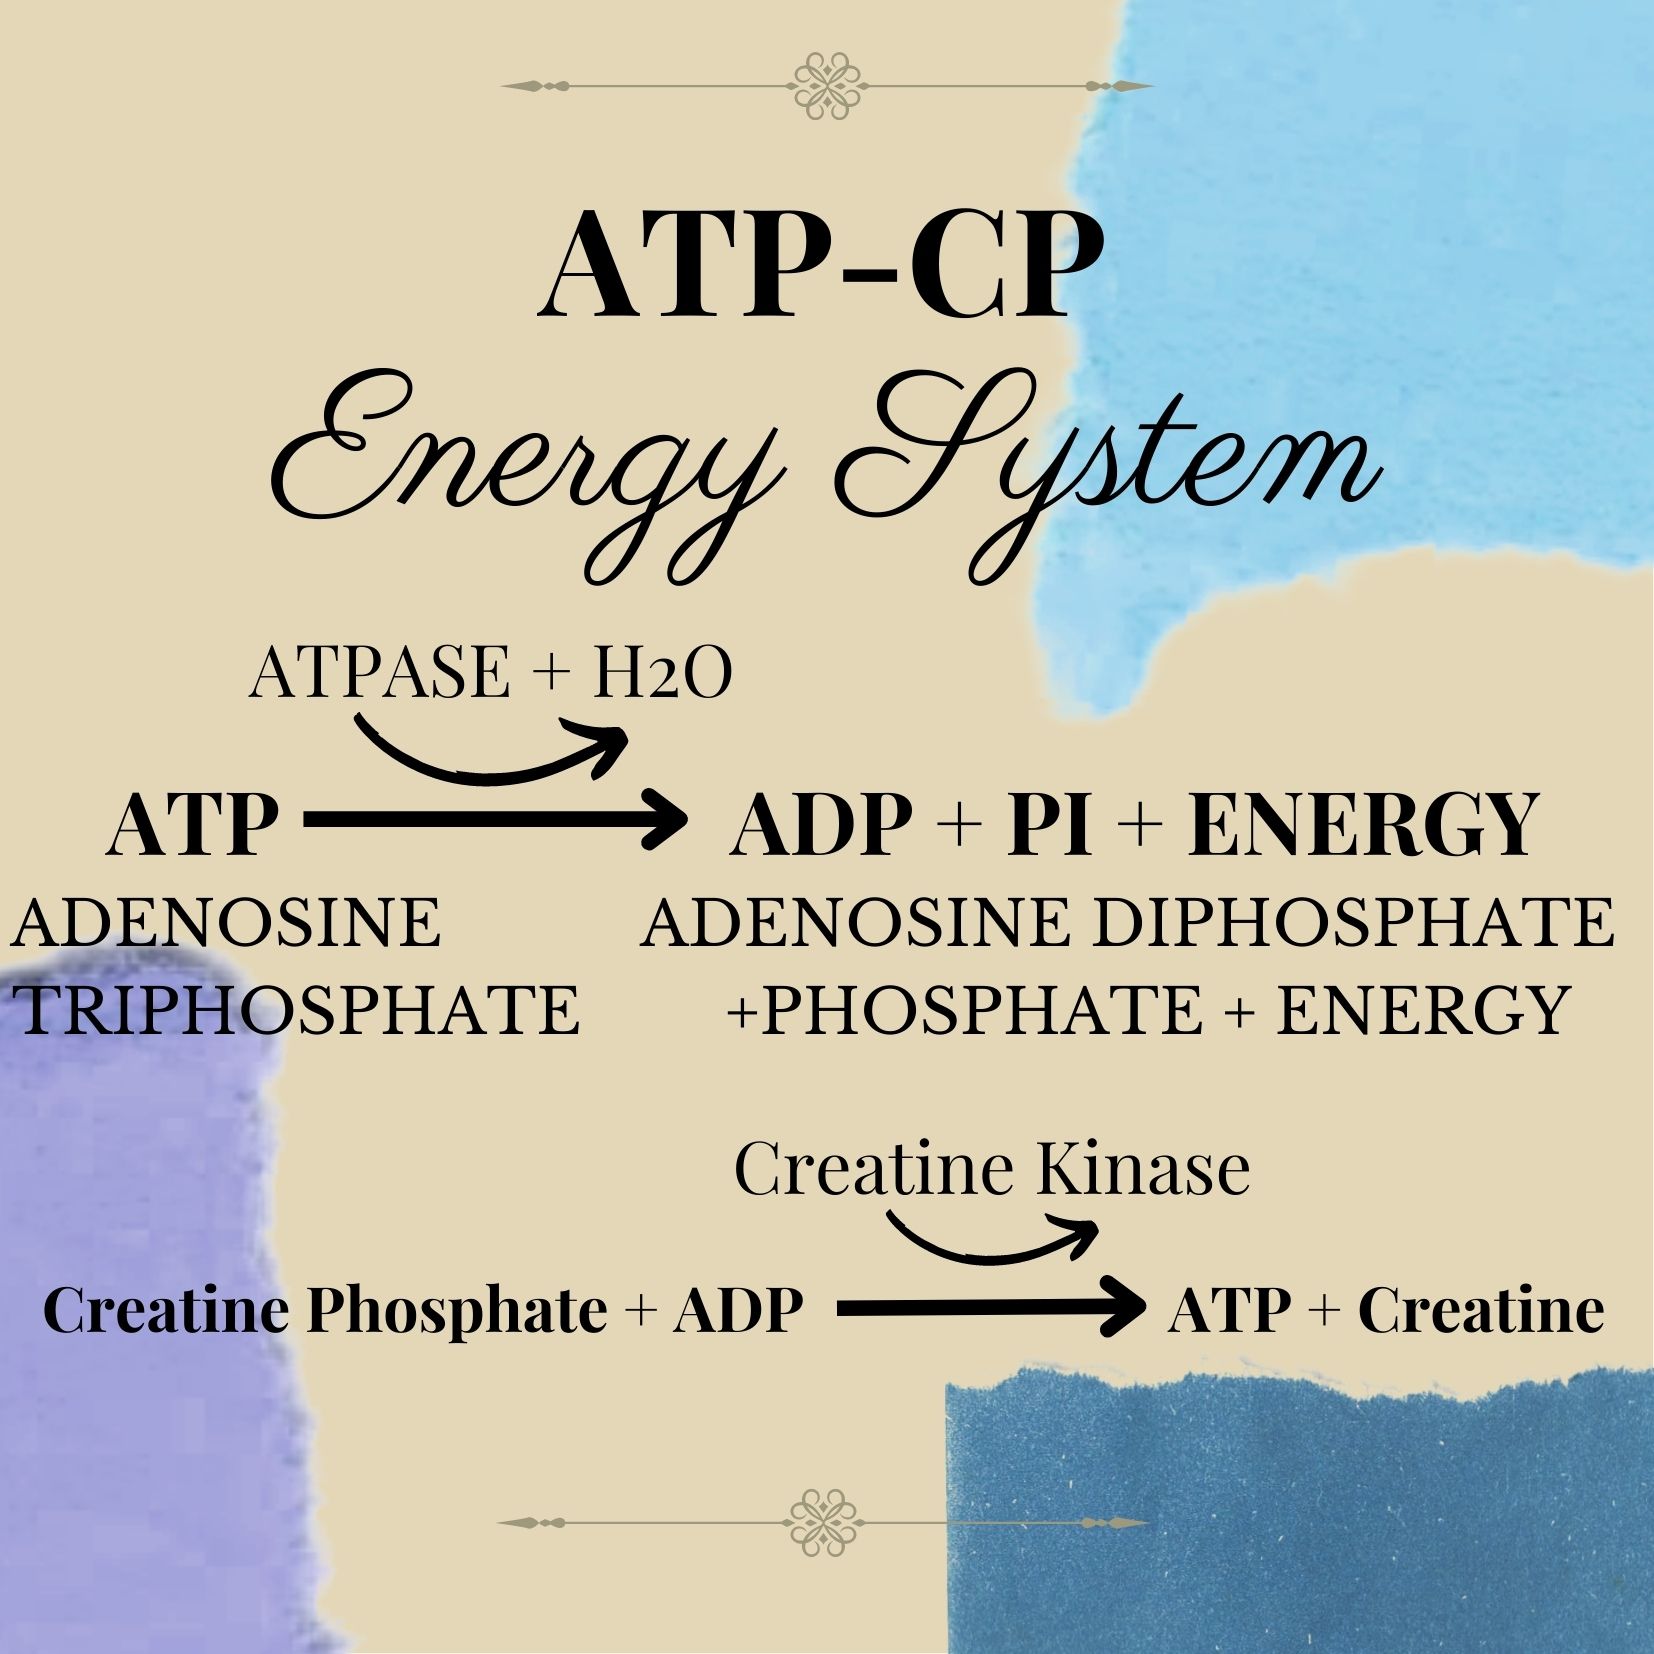 Infographic summarizing the ATP-CP system